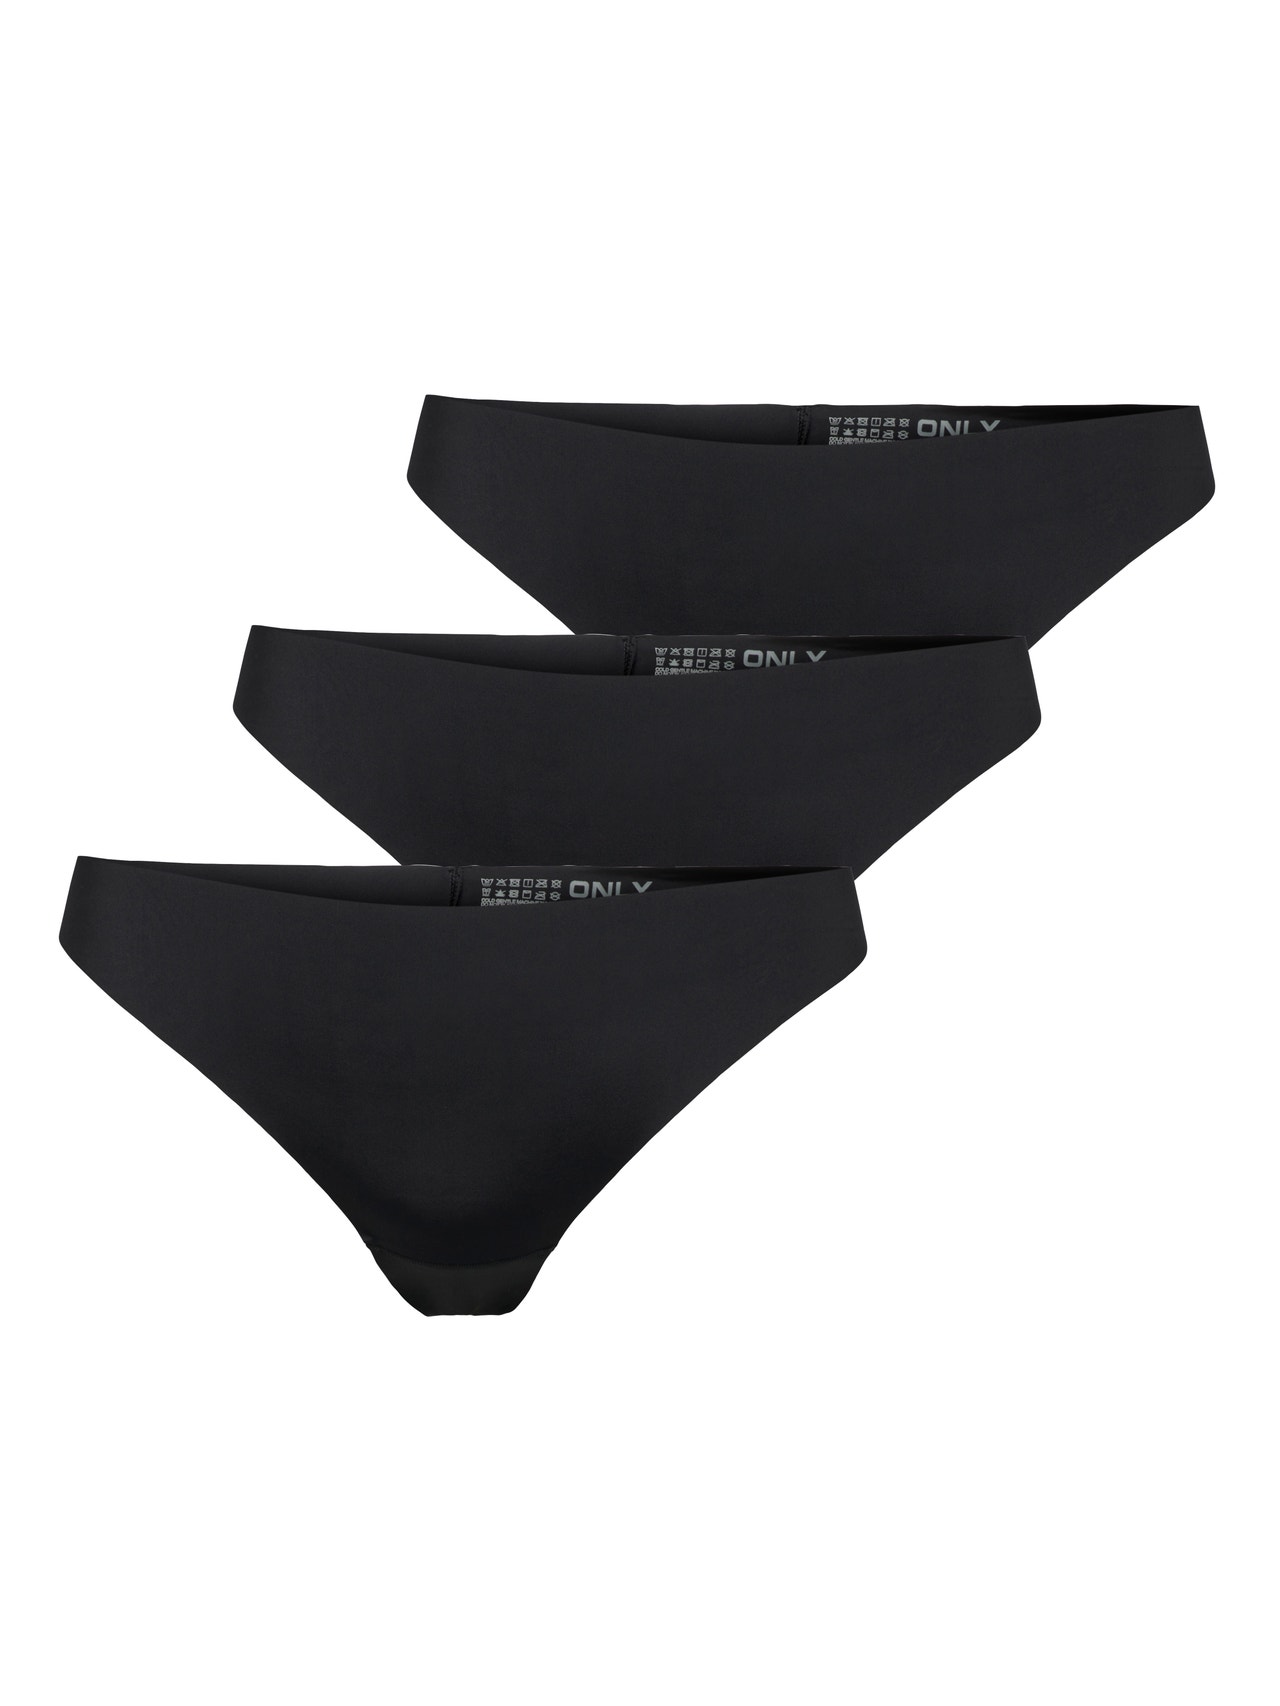 https://images.only.com/15295983/4250126/001/only-3-packthongs-black.jpg?v=8aeca3196e25ce89ae41c33e6a6ab74f&format=webp&width=1280&quality=90&key=25-0-3